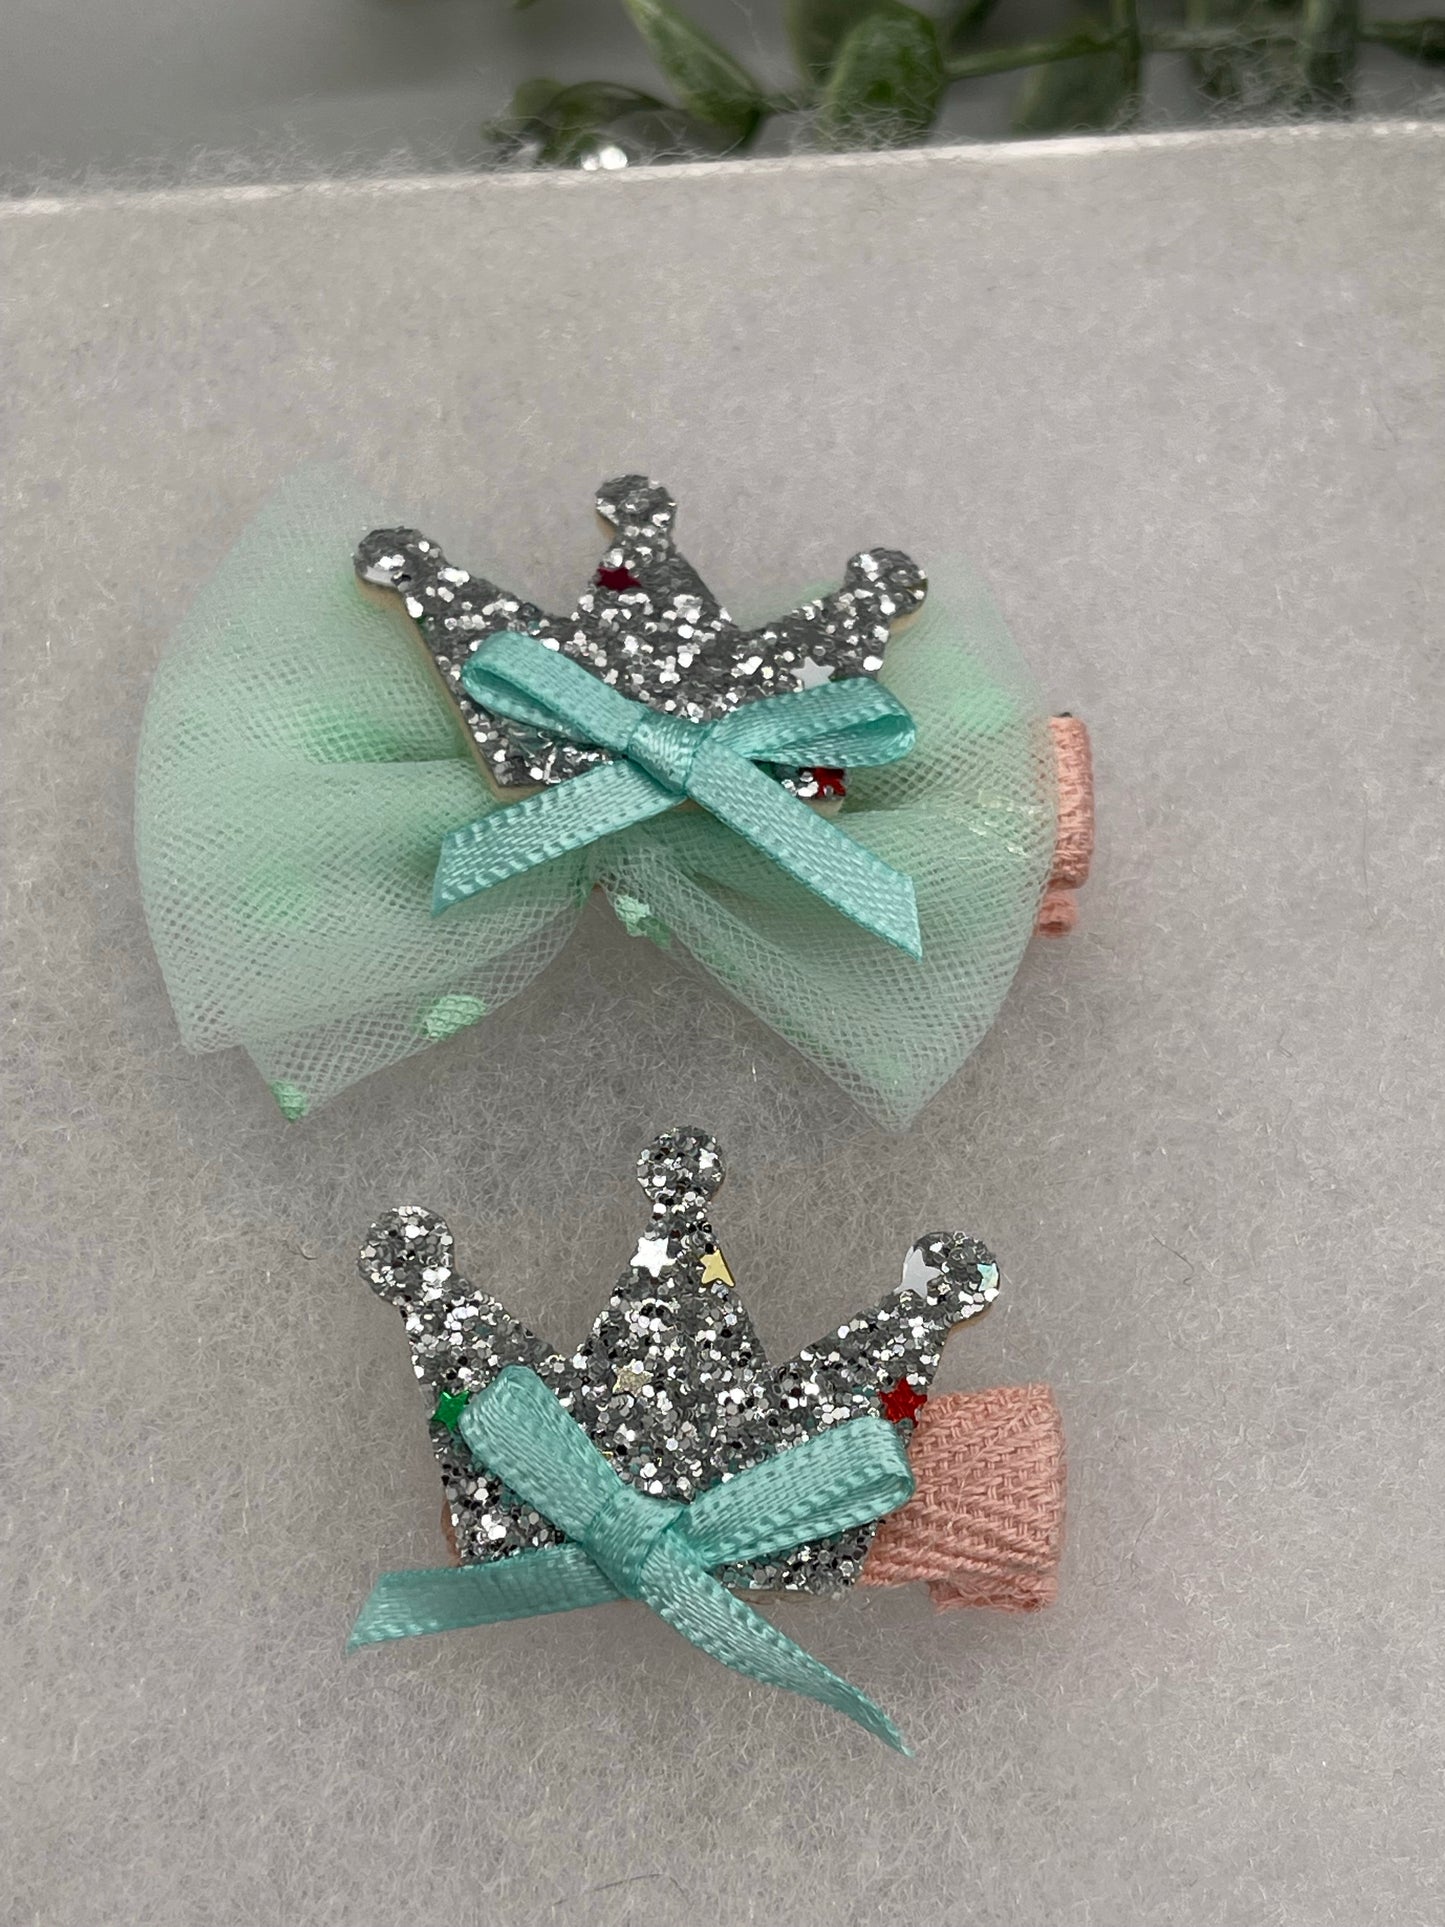 Teal Bow crown Girls hair clips 2 pc set pink 1.0” 1.5” alligator clips girls little girls hair accessory accessories jewelry